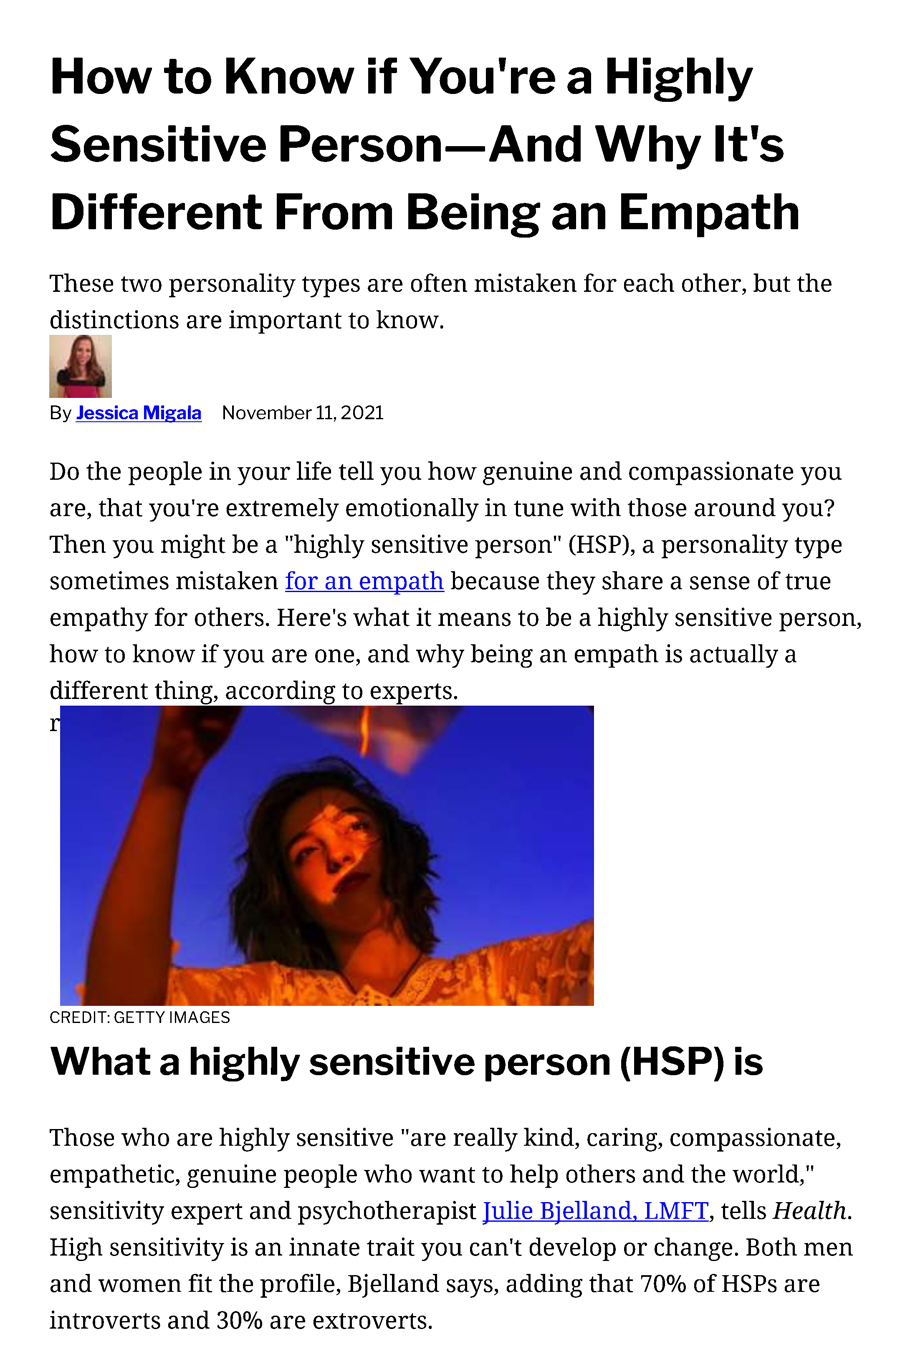 How to Know If You’re a Highly Sensitive Person